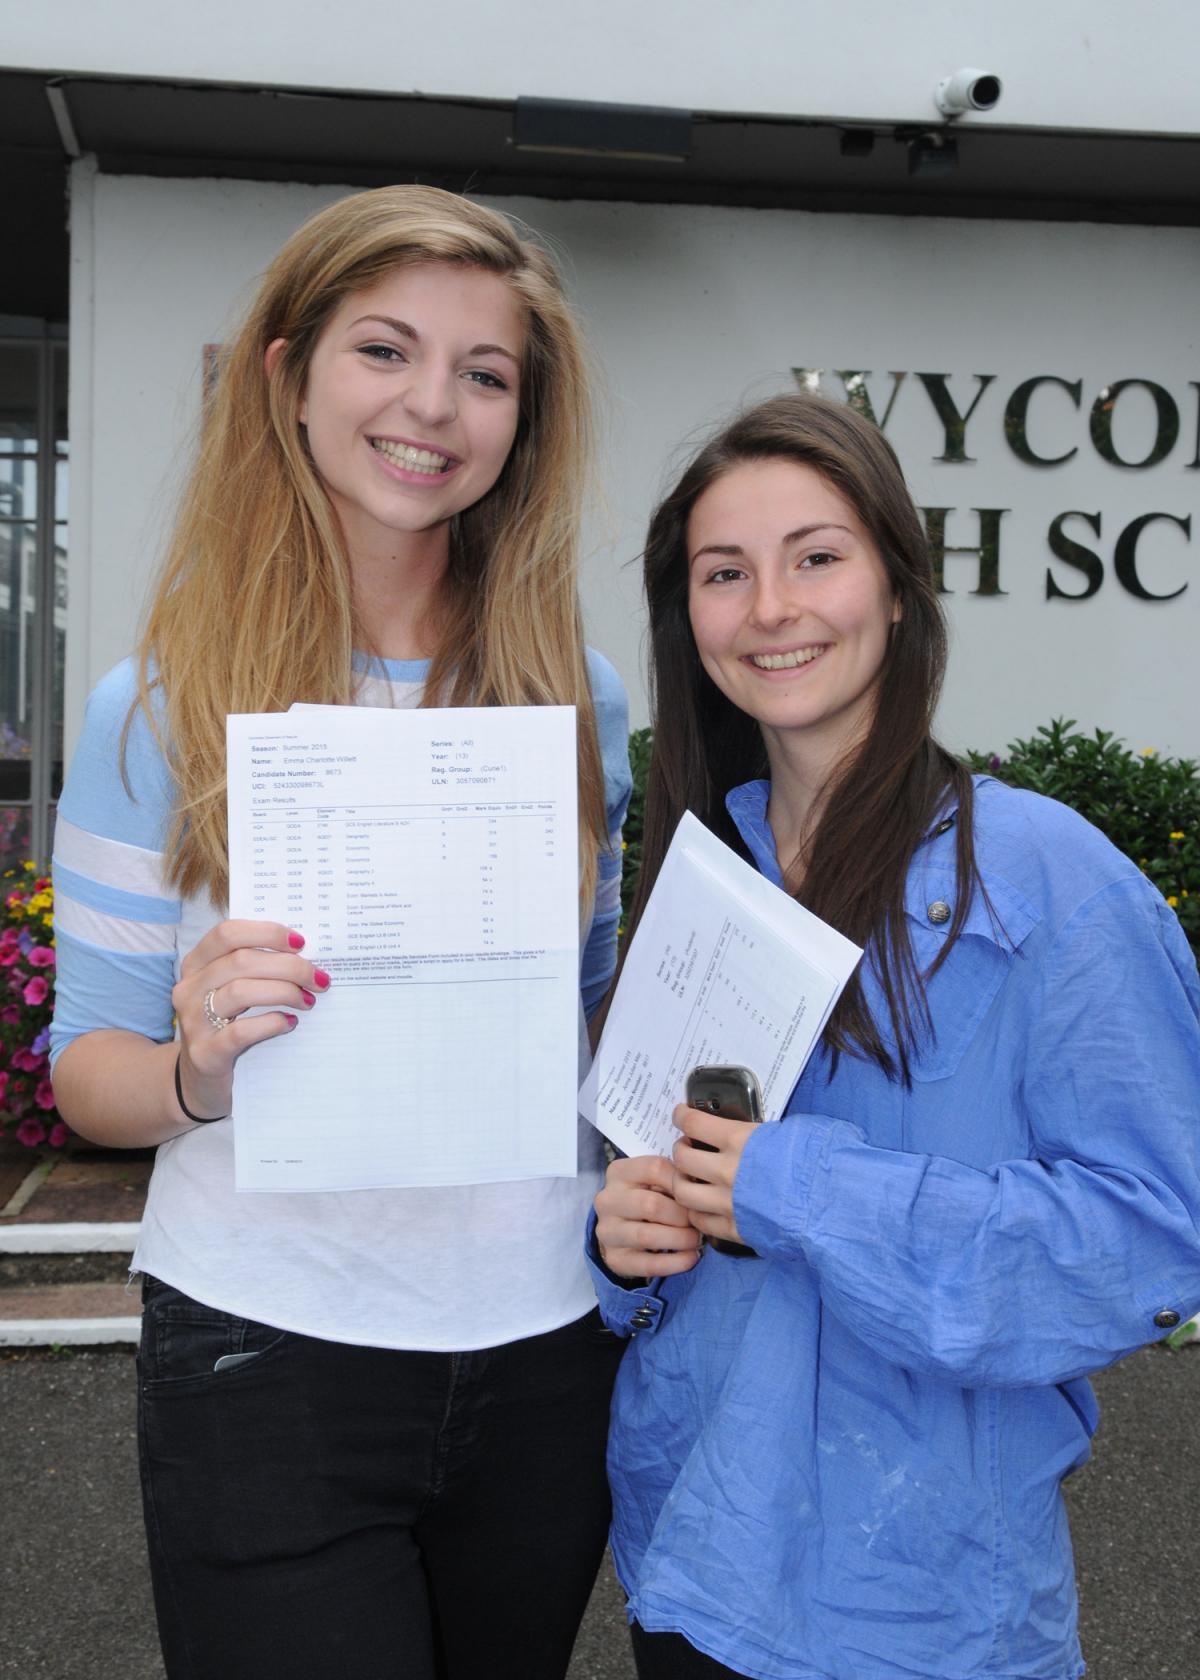 Wycombe High School A Level results Emma Willett and Anna May